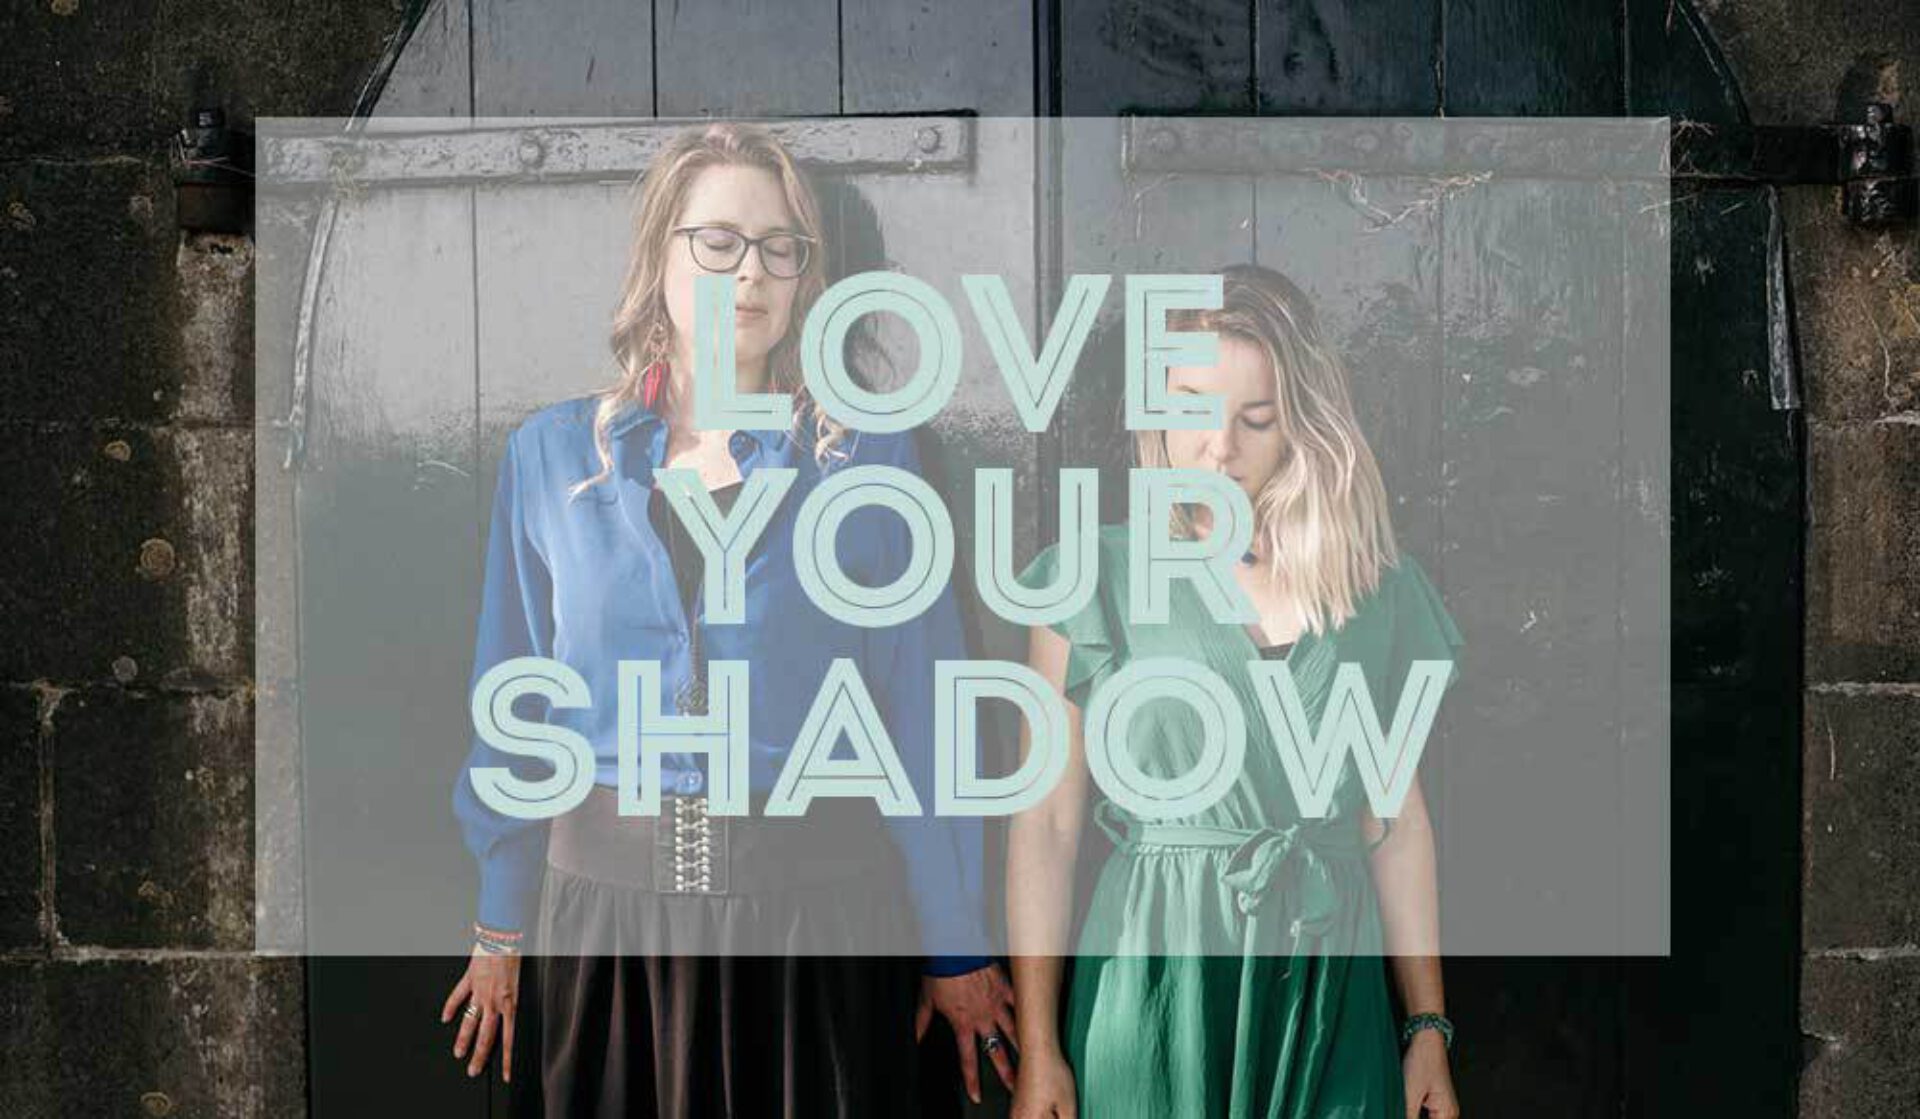 Love your shadow